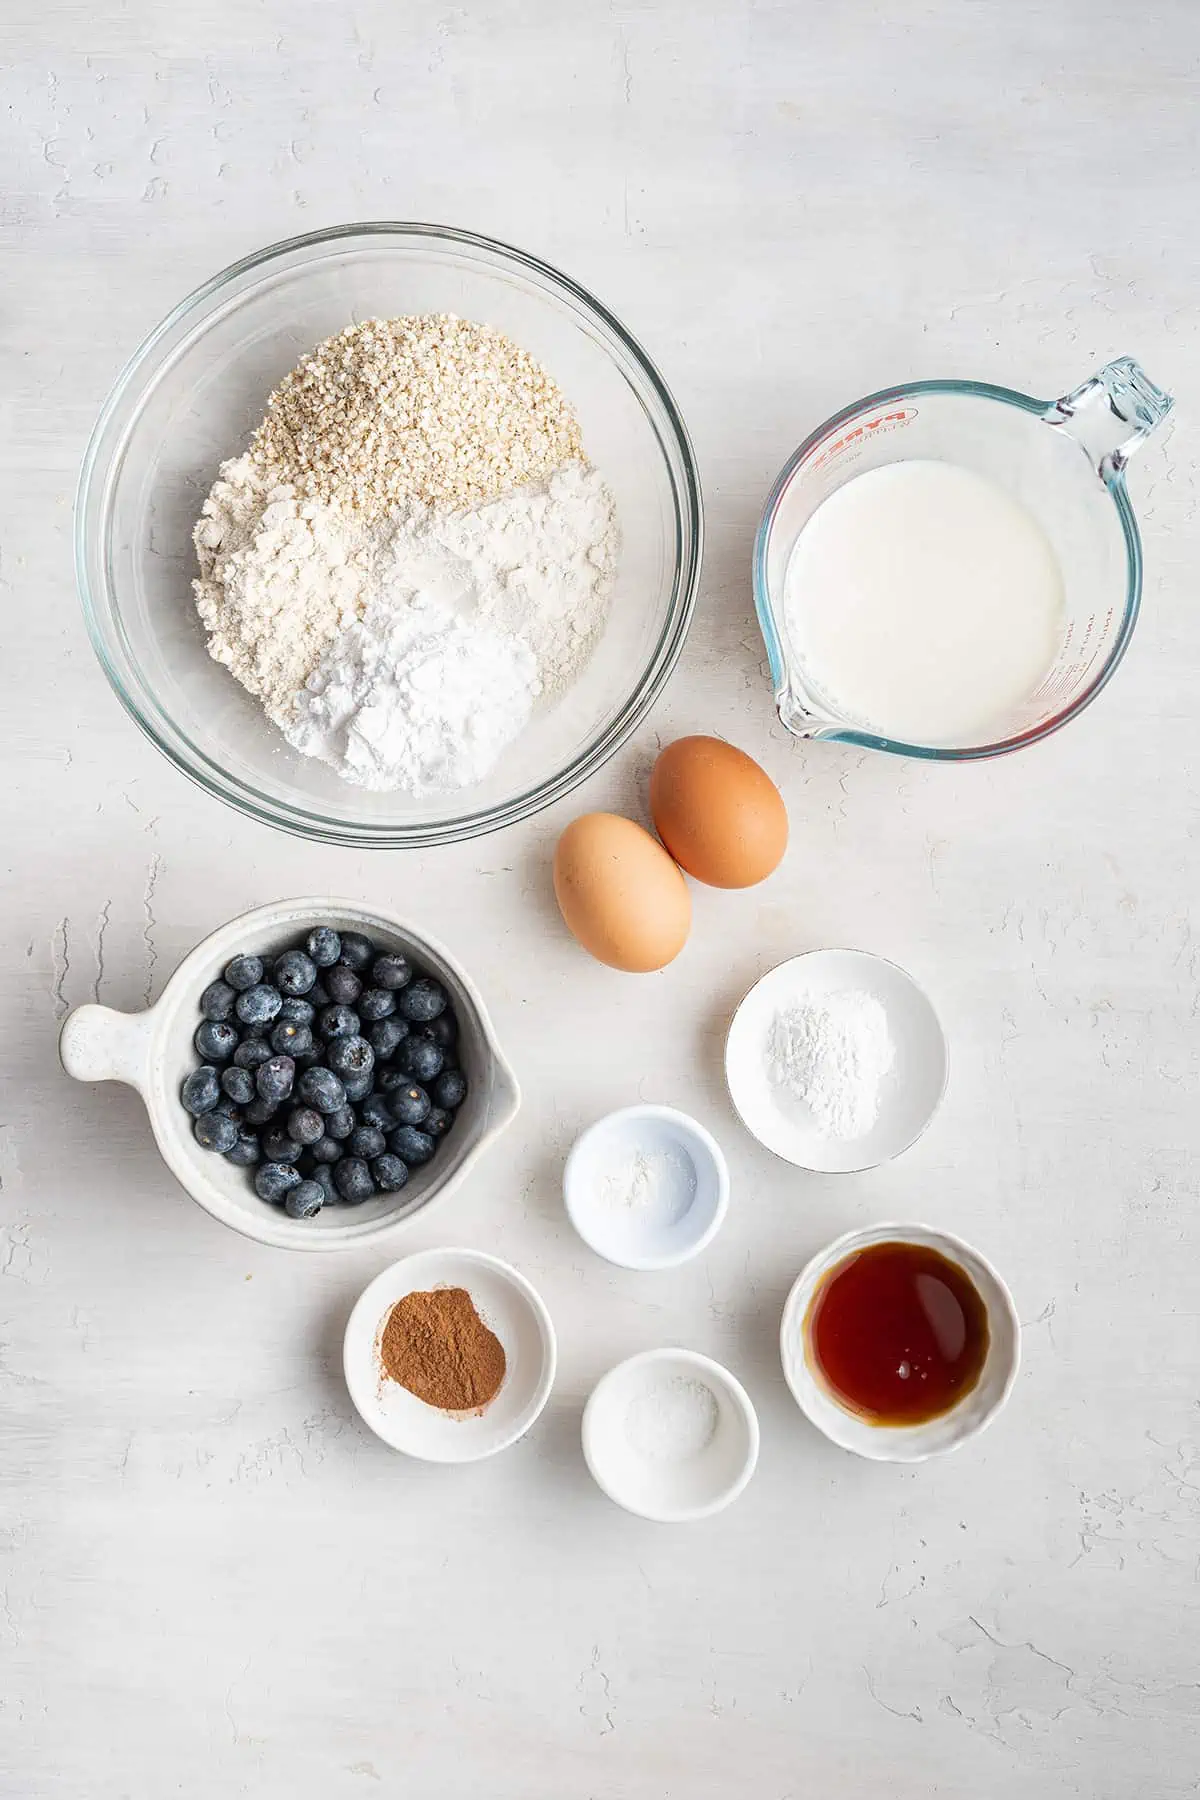 Overhead view of the ingredients needed for gluten-free blueberry pancakes: a bowl of sorghum flour, brown rice flour, tapioca flour, and quinoa flakes, a pyrex of almond milk, a bowl of blueberries, a bowl of maple syrup, a bowl of cinnamon, a bowl of xanthan gum, a bowl of salt, a bowl of baking powder, and two eggs